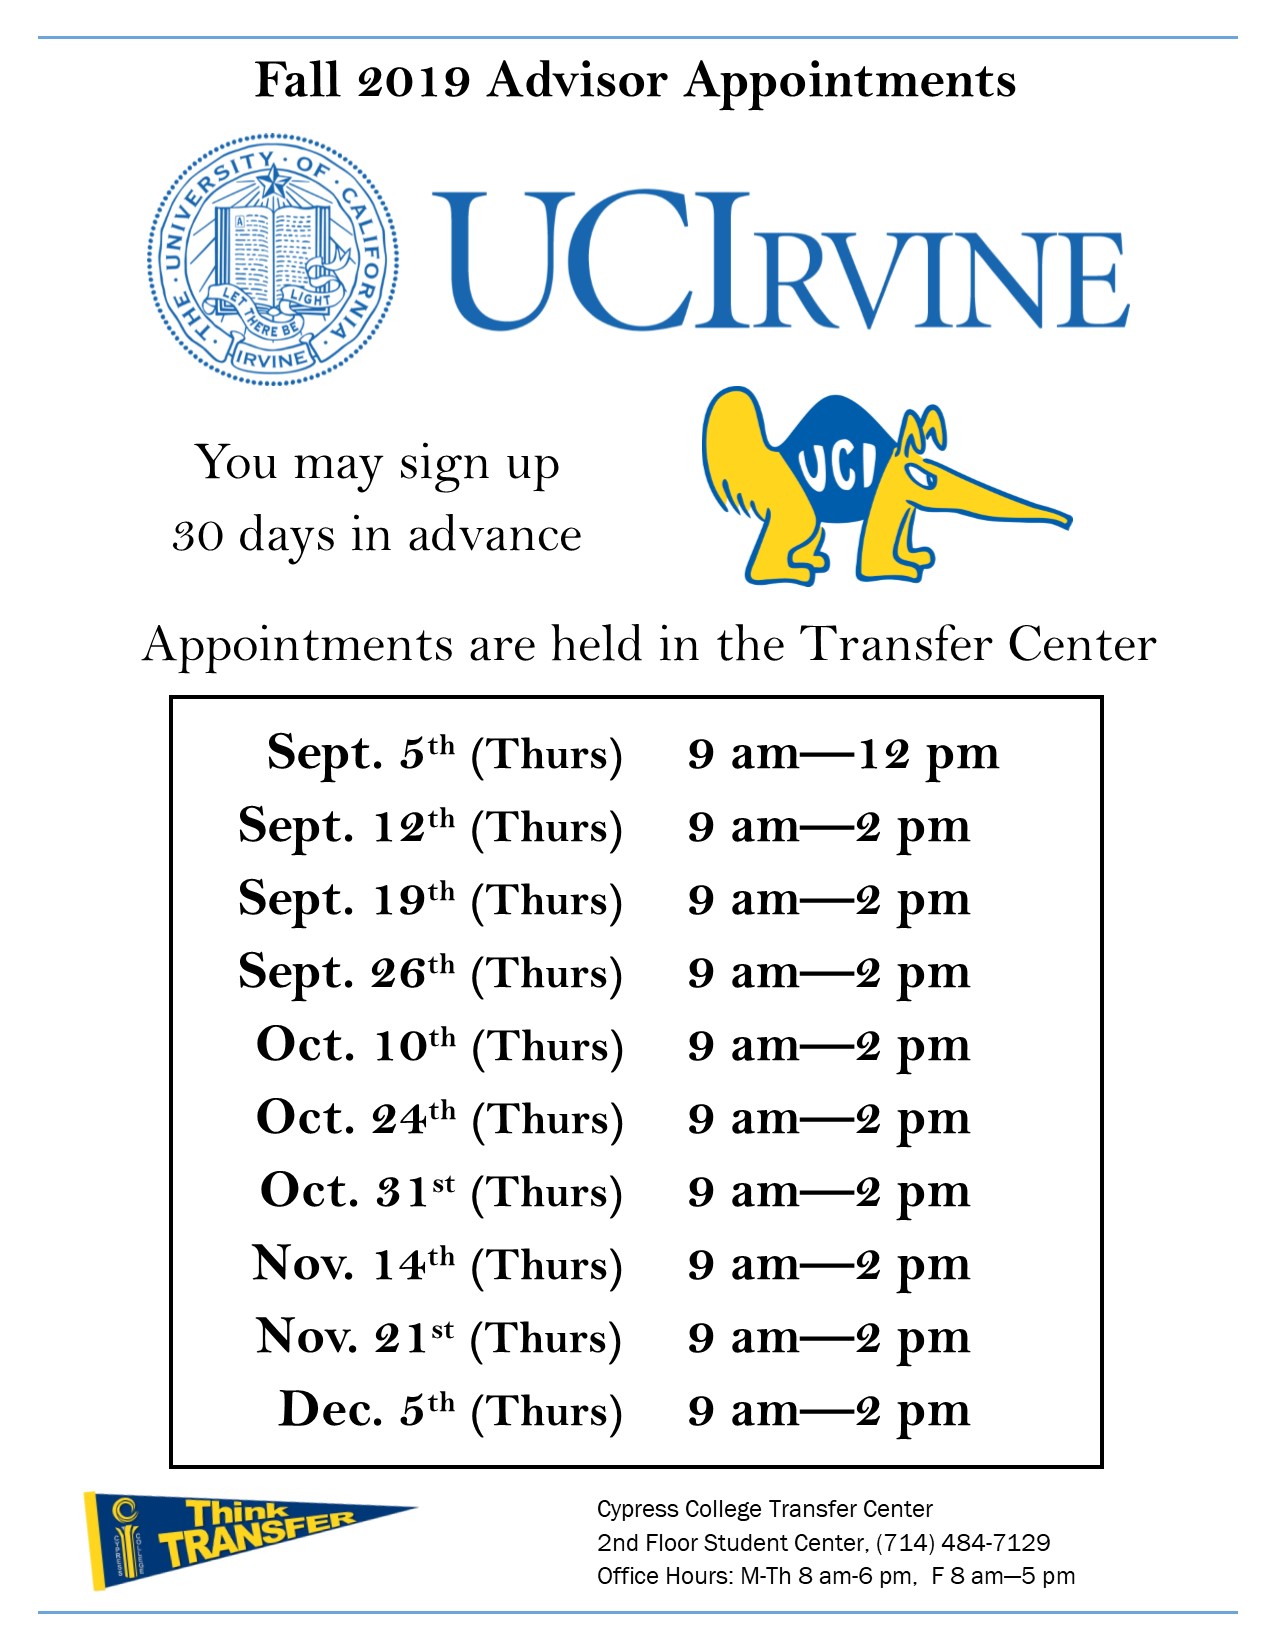 Transfer Center UCI advisor appointments dates and times